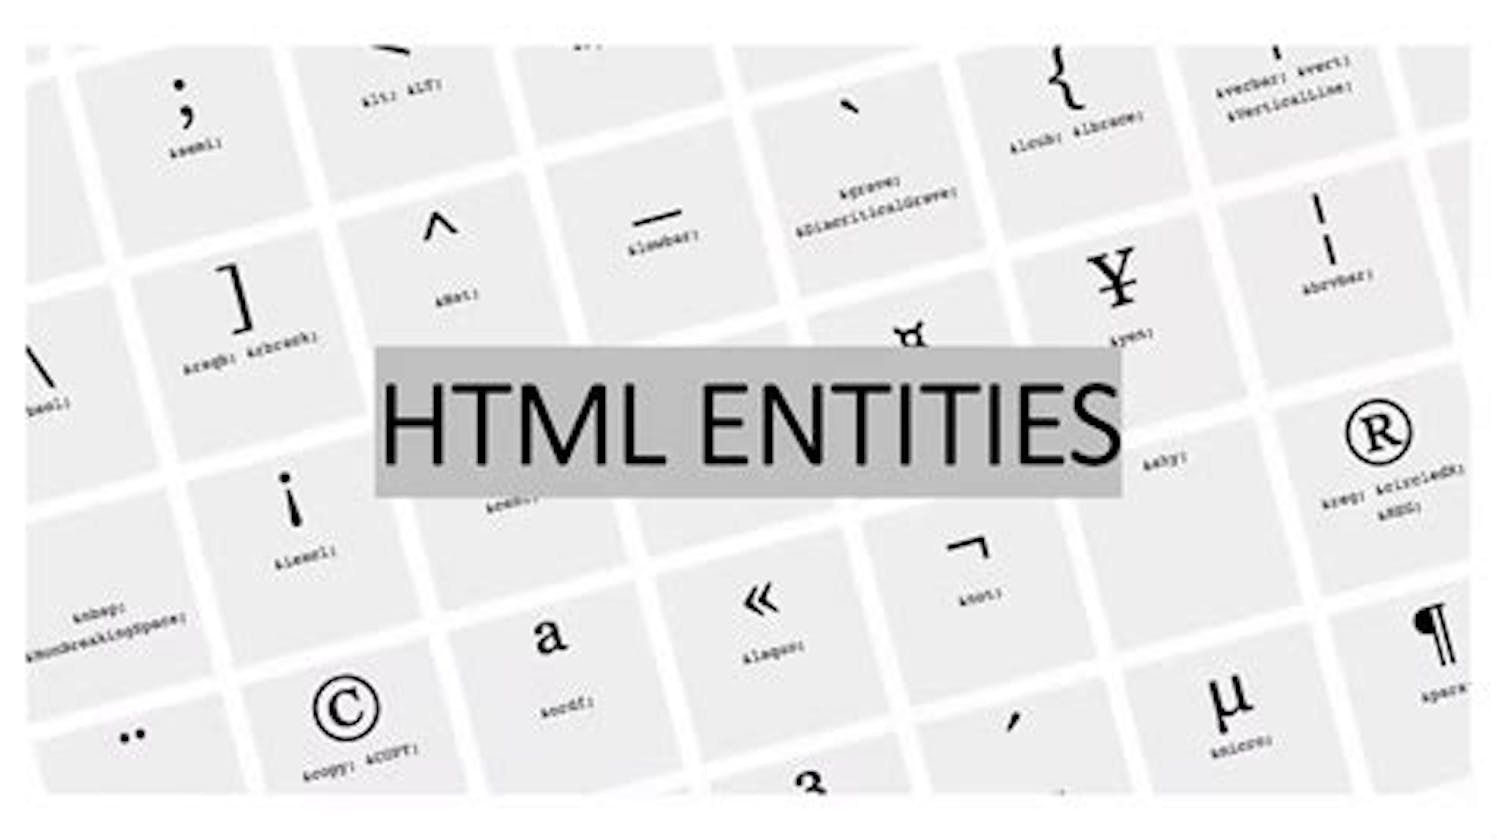 What are HTML Entities?